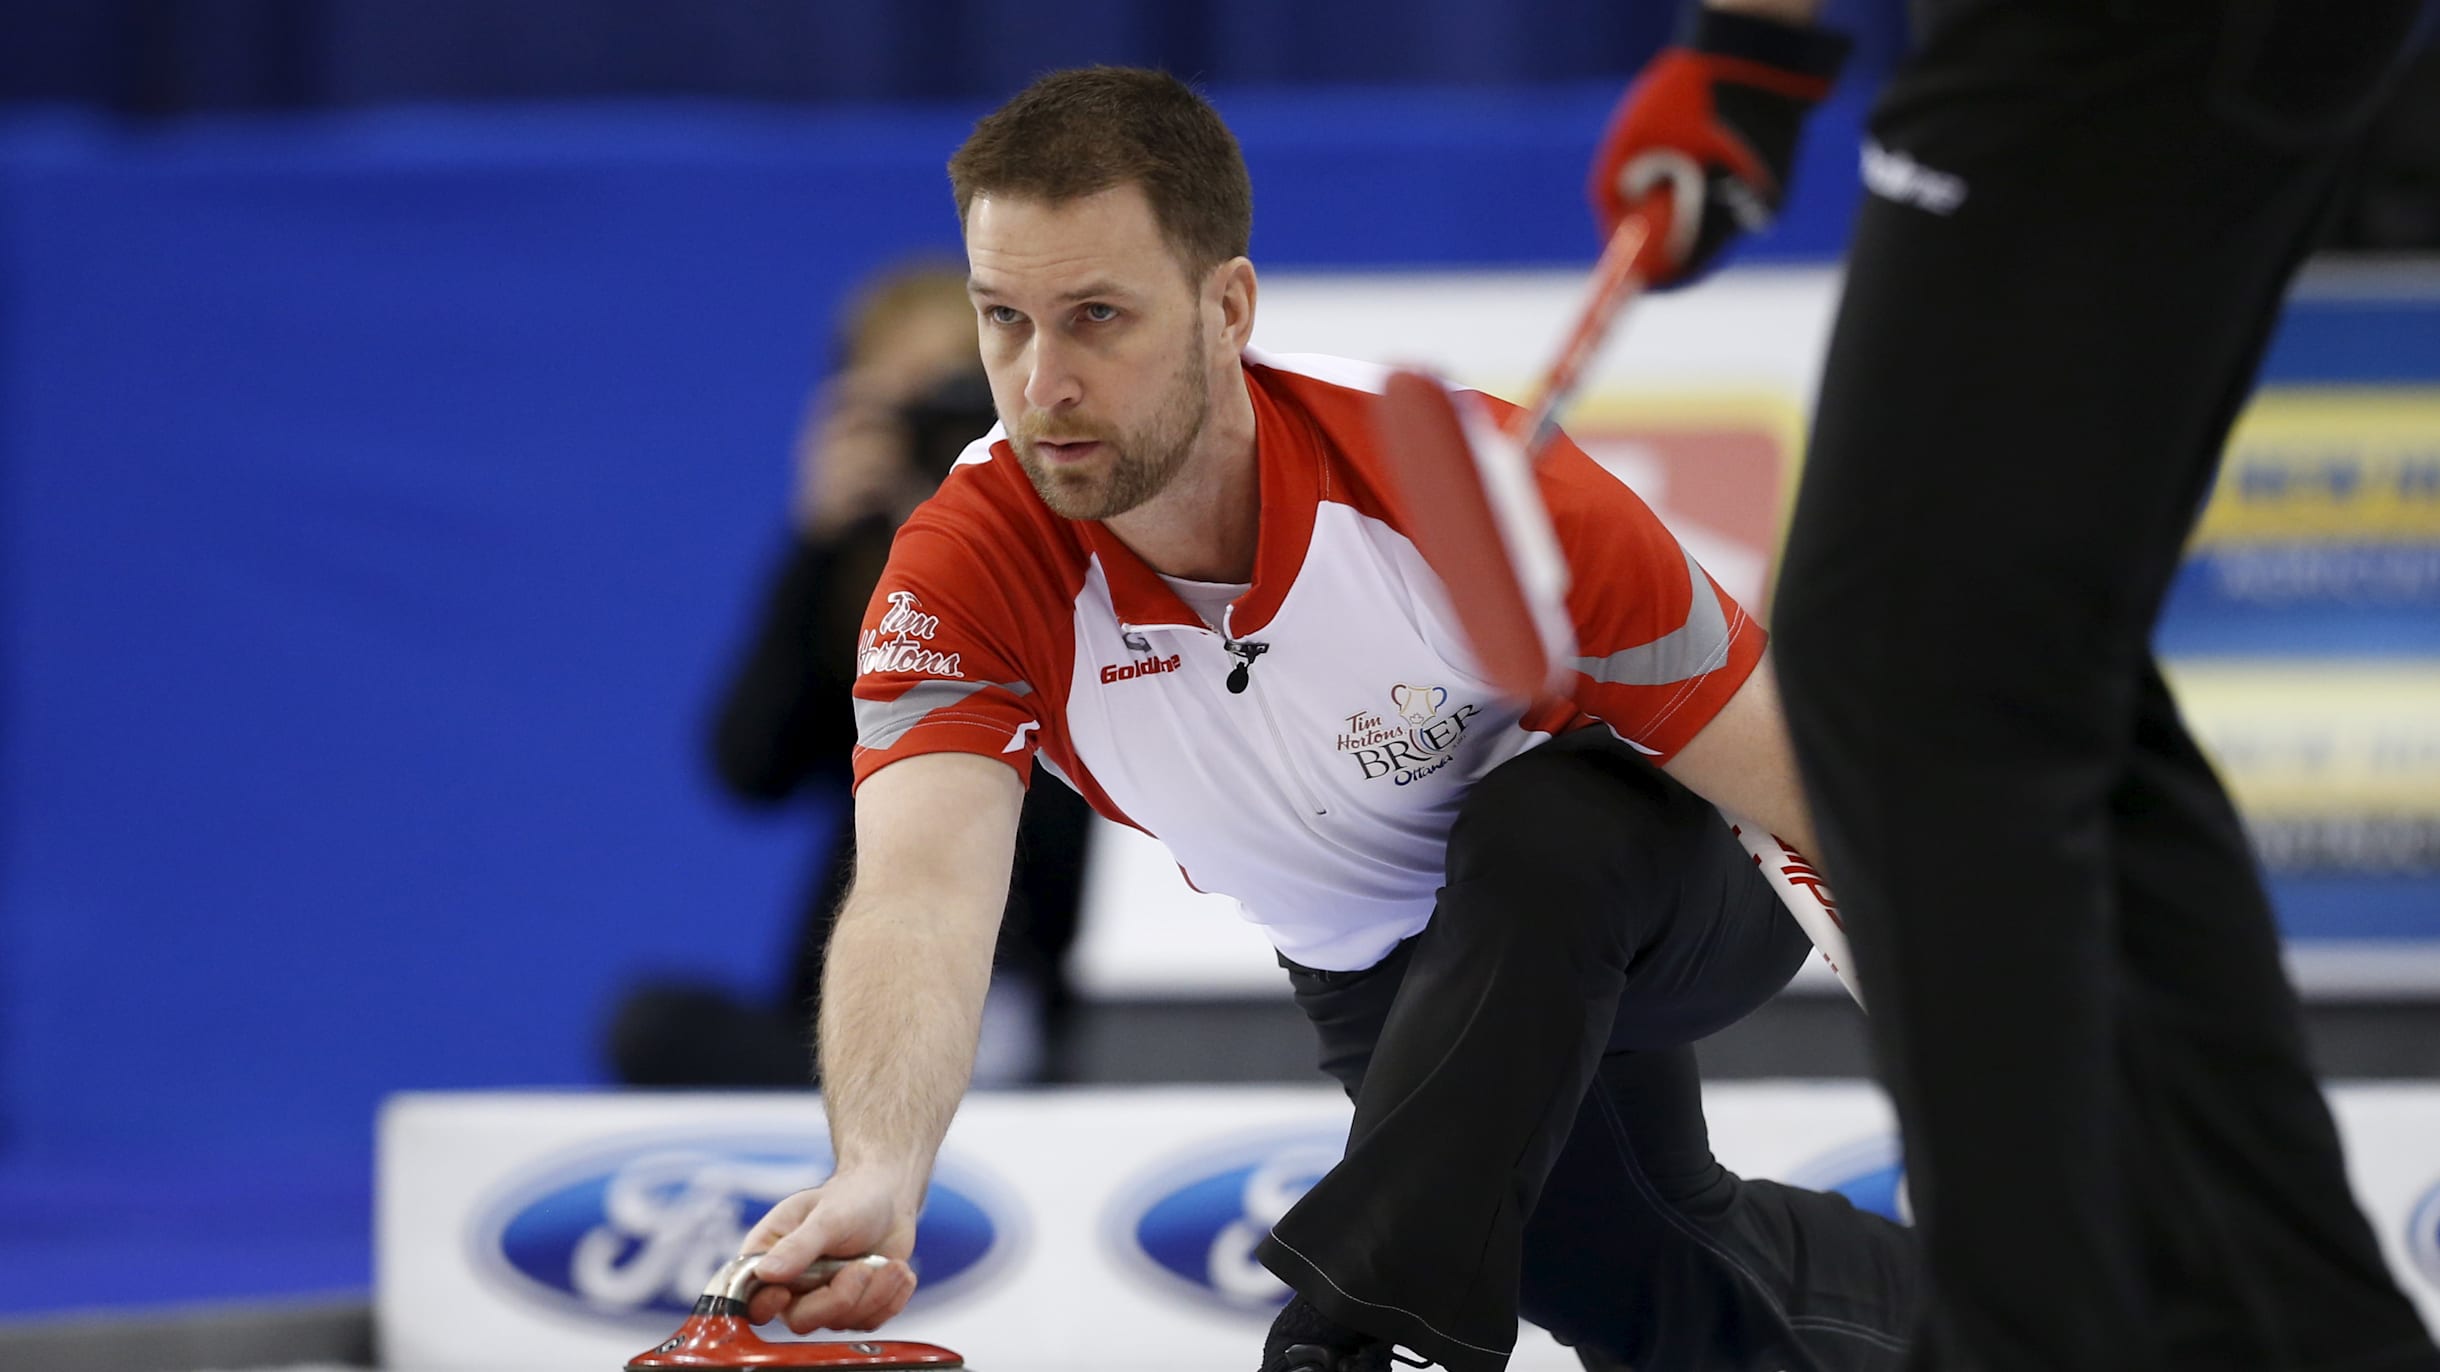 Olympic champ Gushue returning to studies at 40